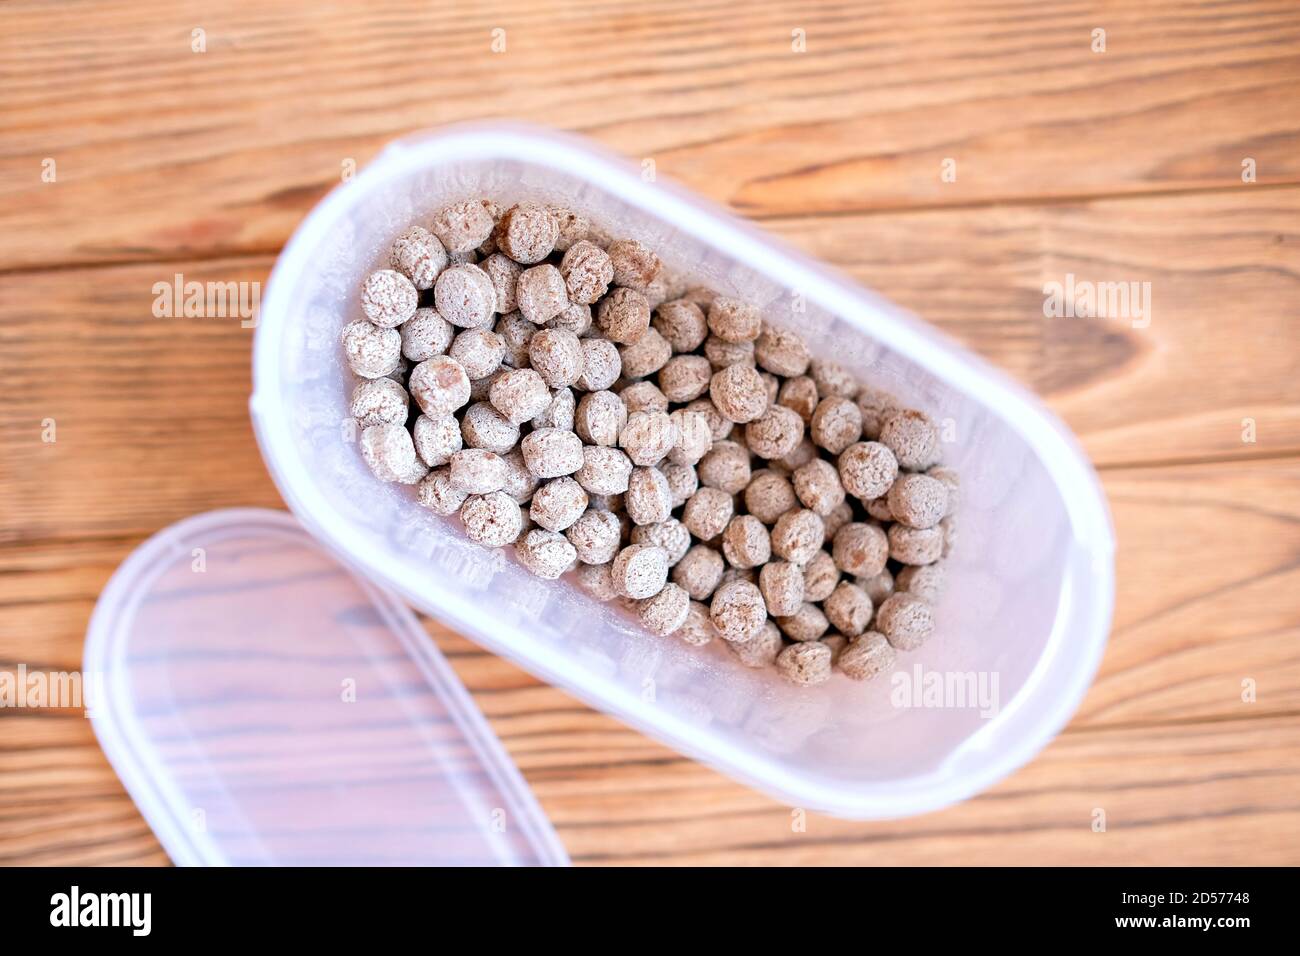 Bran in a plastic container. Dry edible balls. Wood background Stock Photo